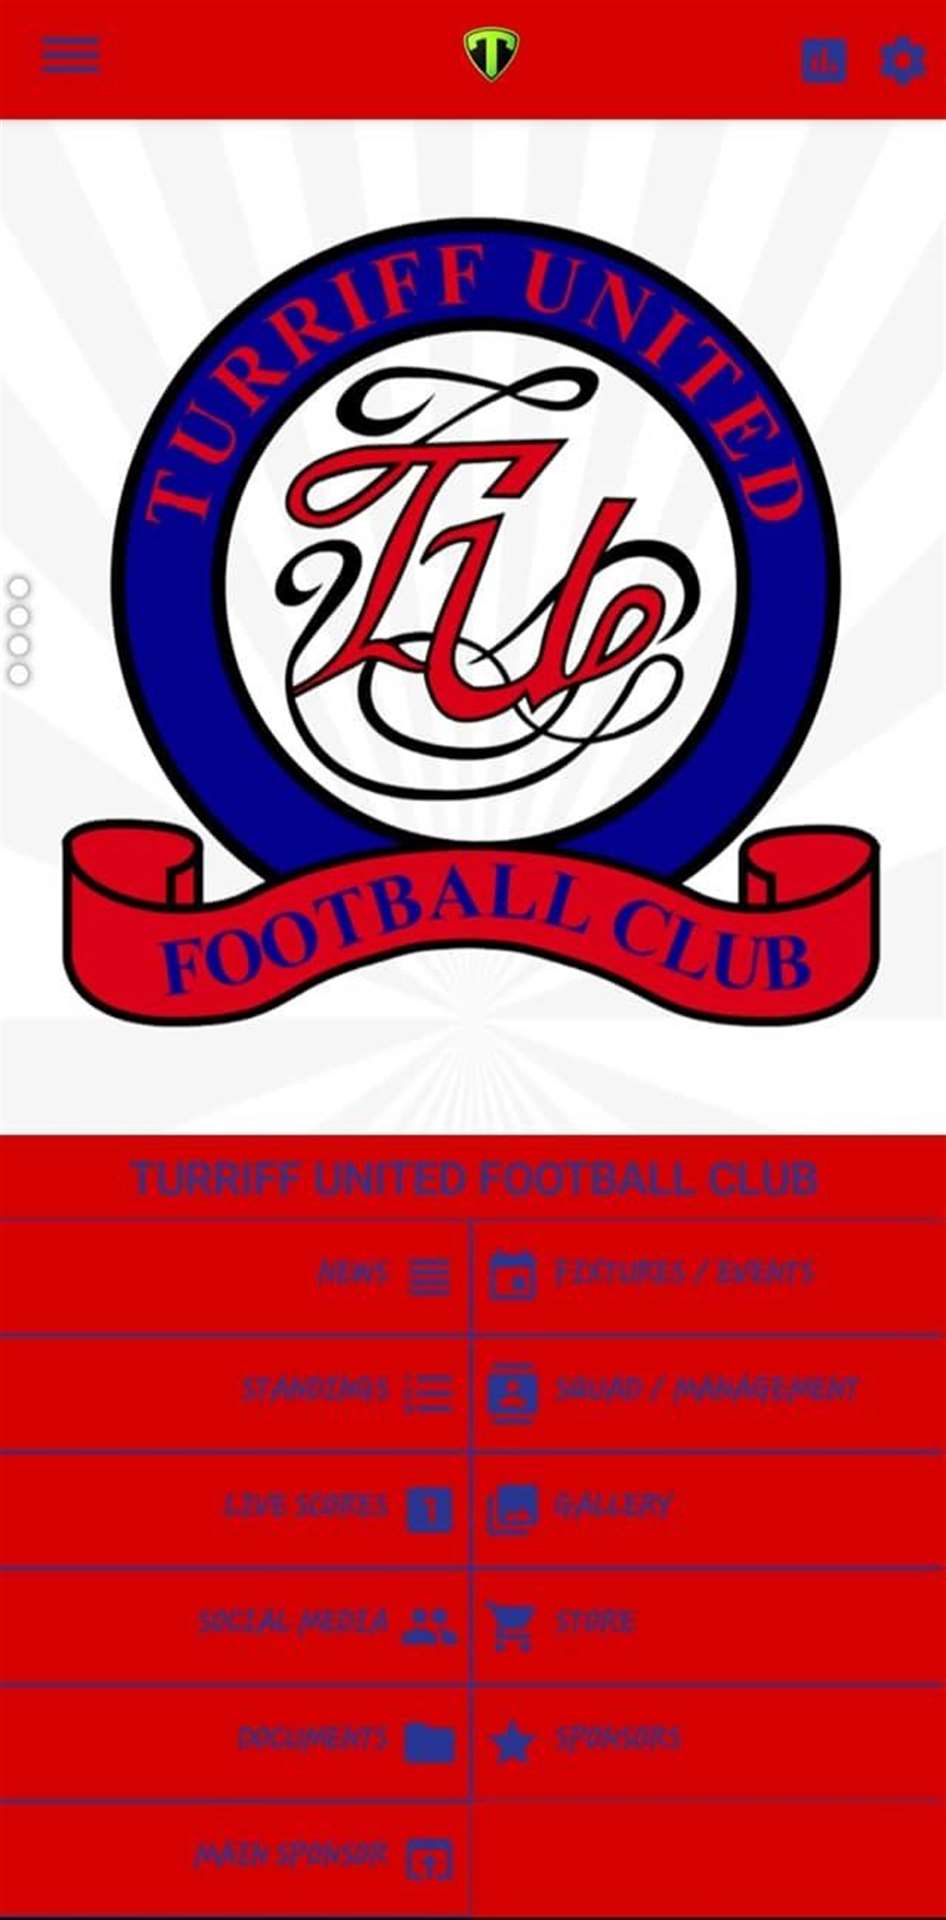 Turriff United has launched a new mobile phone app.